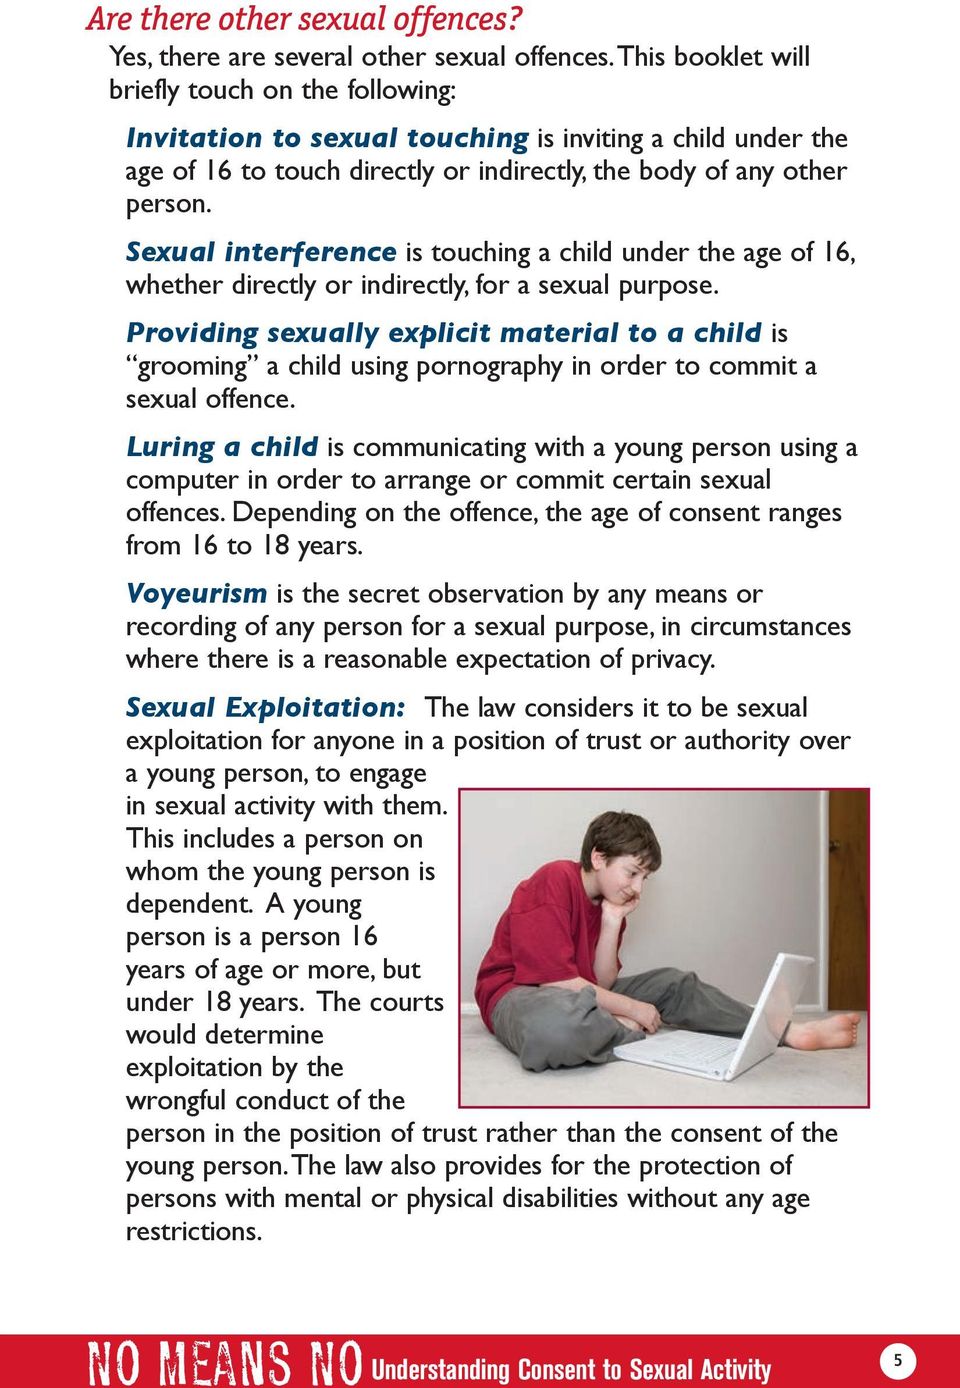 Sexual interference is touching a child under the age of 16, whether directly or indirectly, for a sexual purpose.